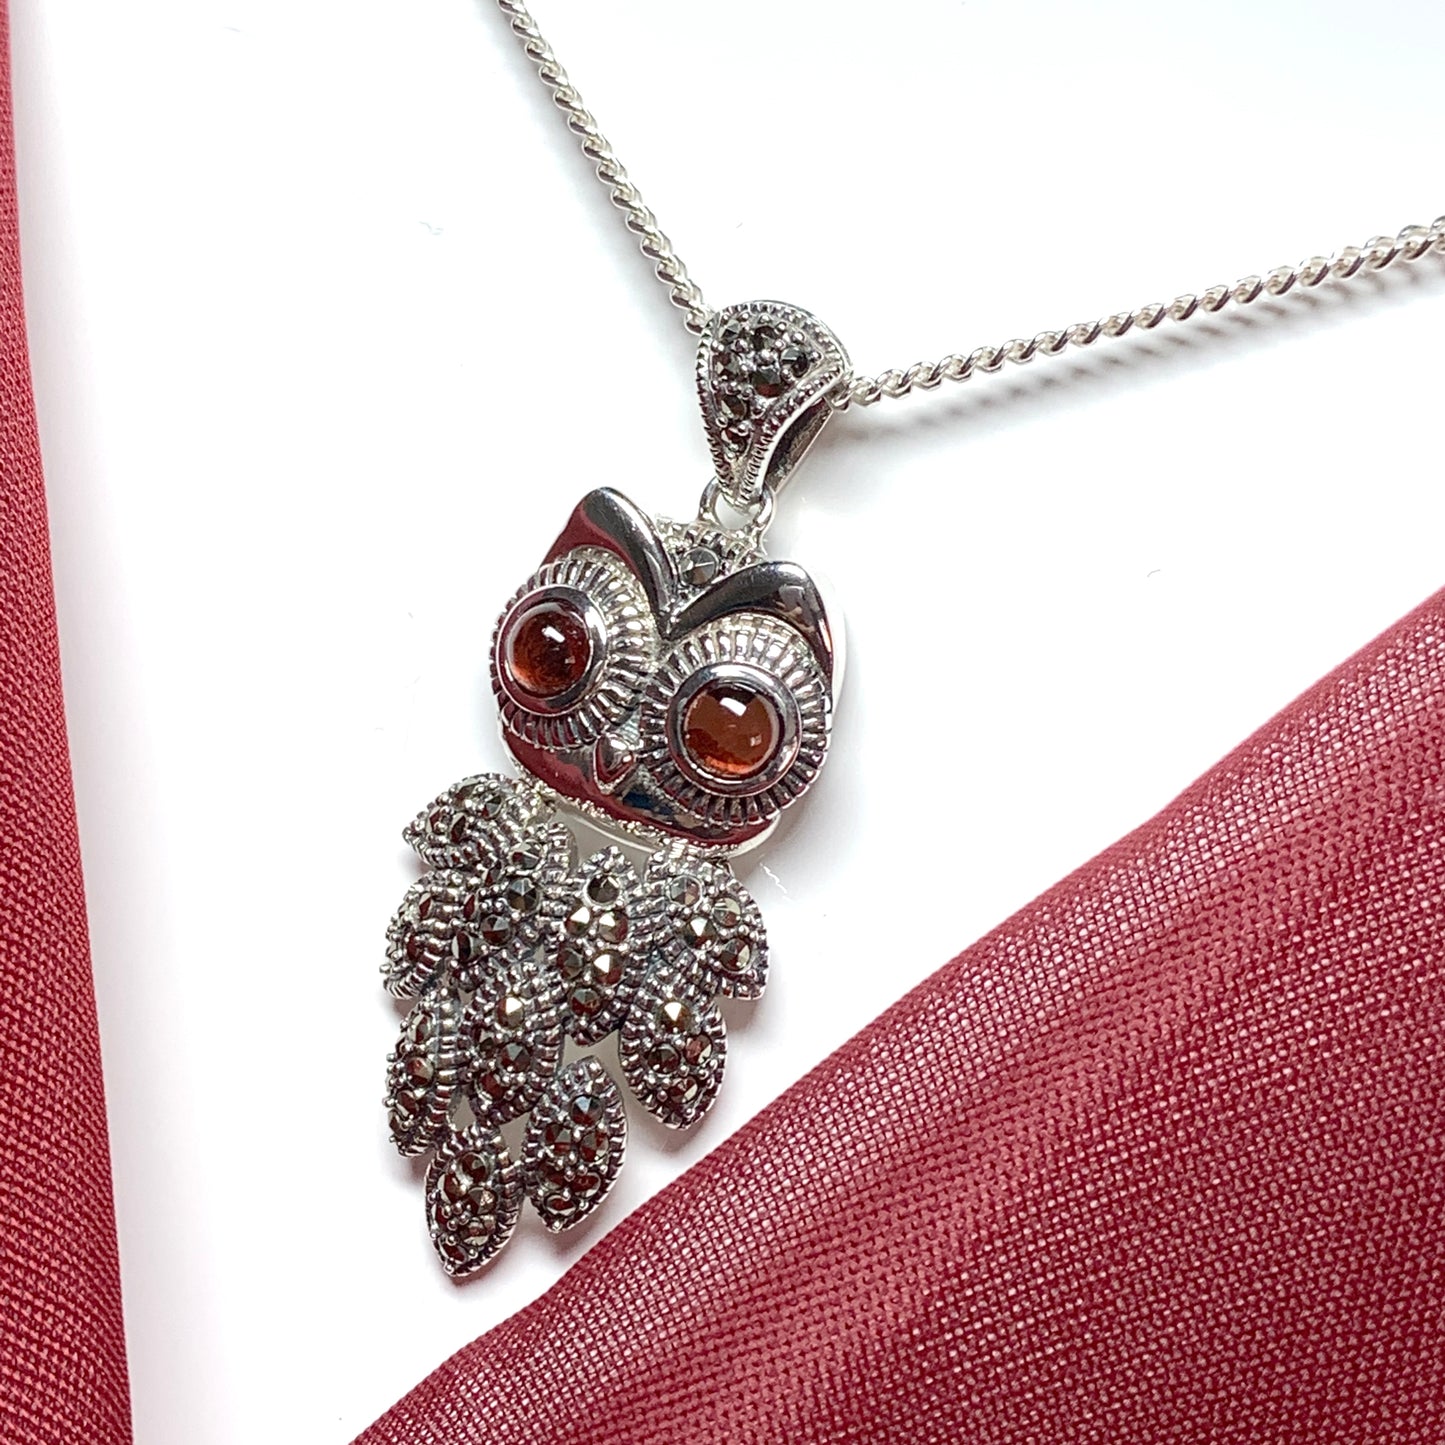 Owl necklace pendant garnet and marcasite sterling silver